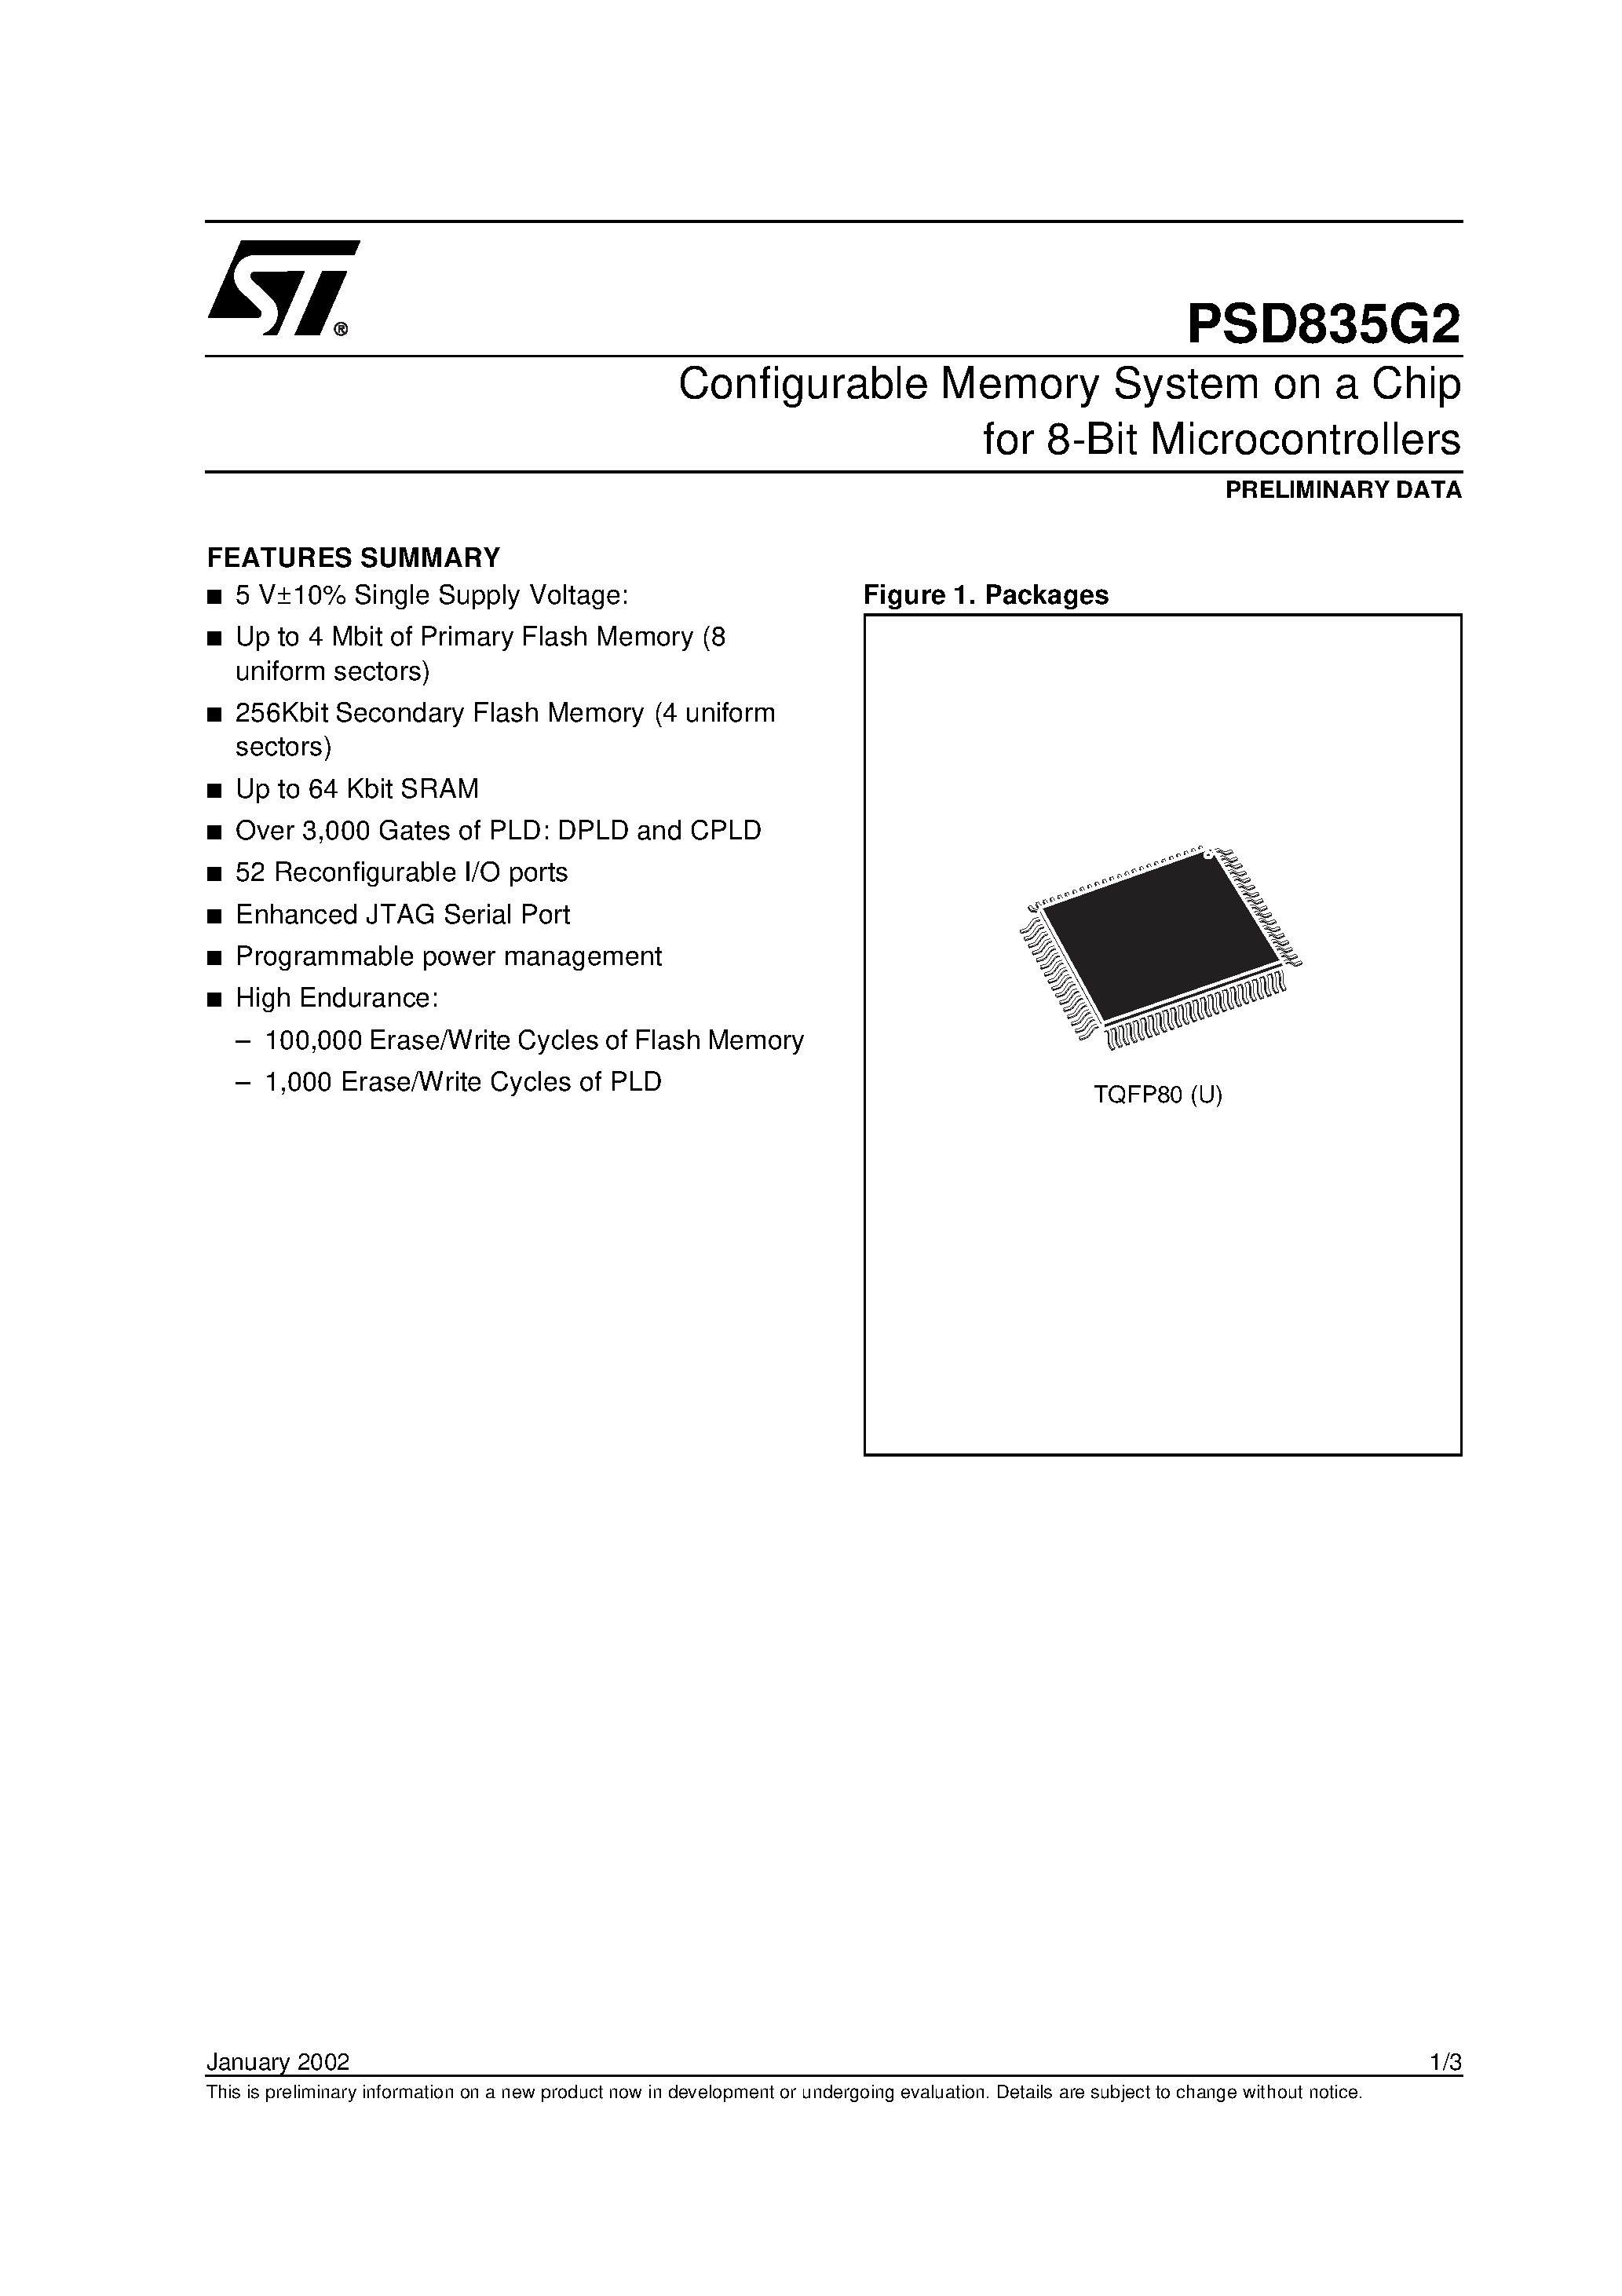 Datasheet PSD835F3-A-12J - Configurable Memory System on a Chip for 8-Bit Microcontrollers page 1